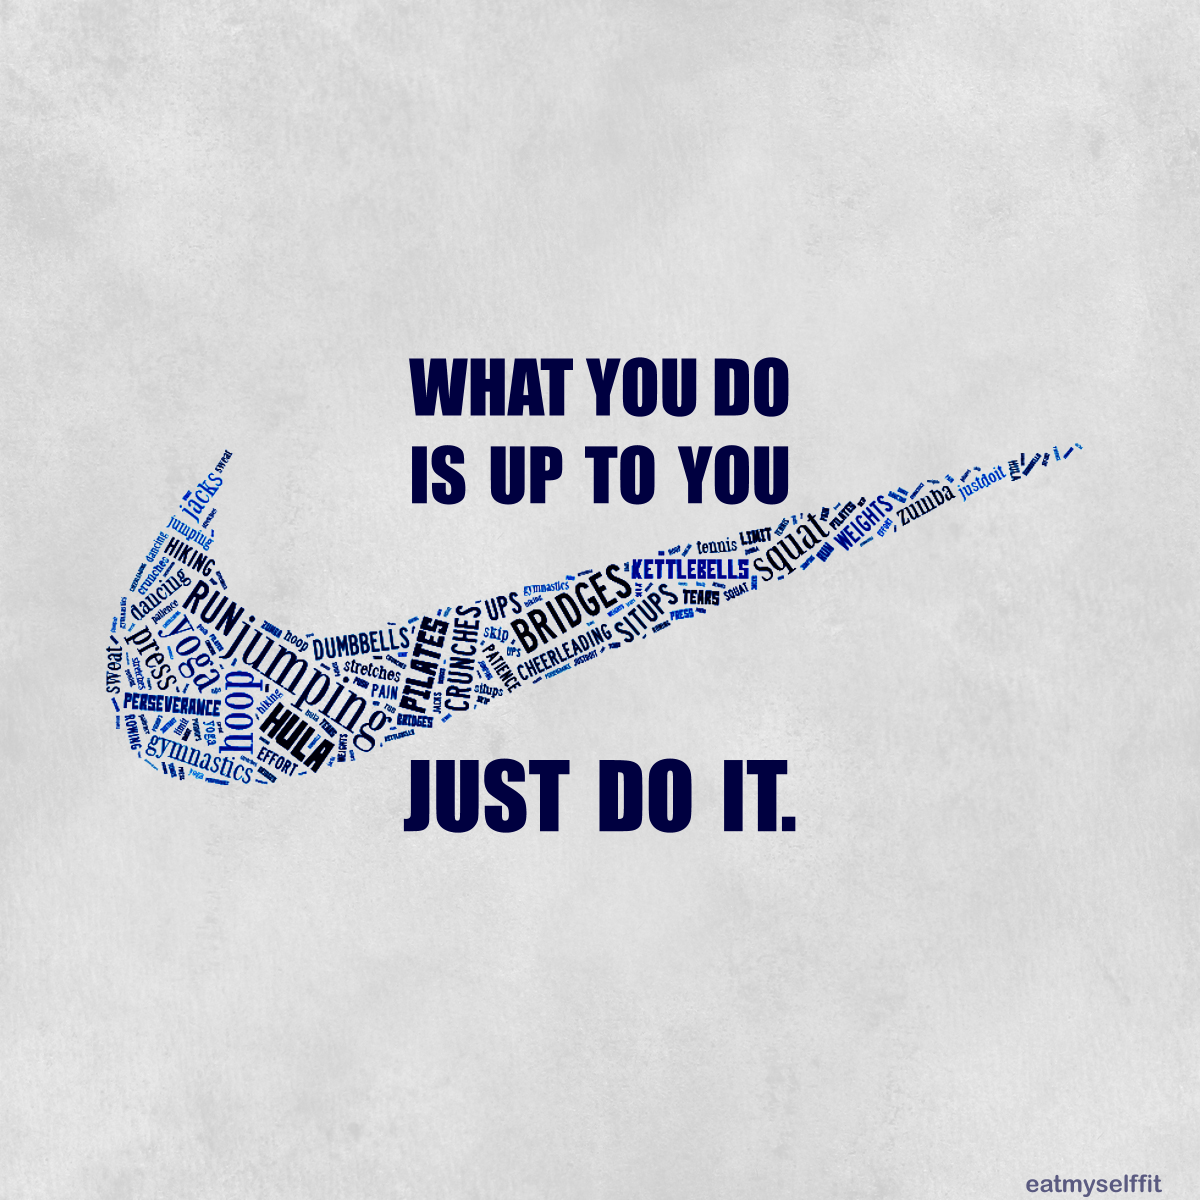 Nike Fitness Quotes. QuotesGram